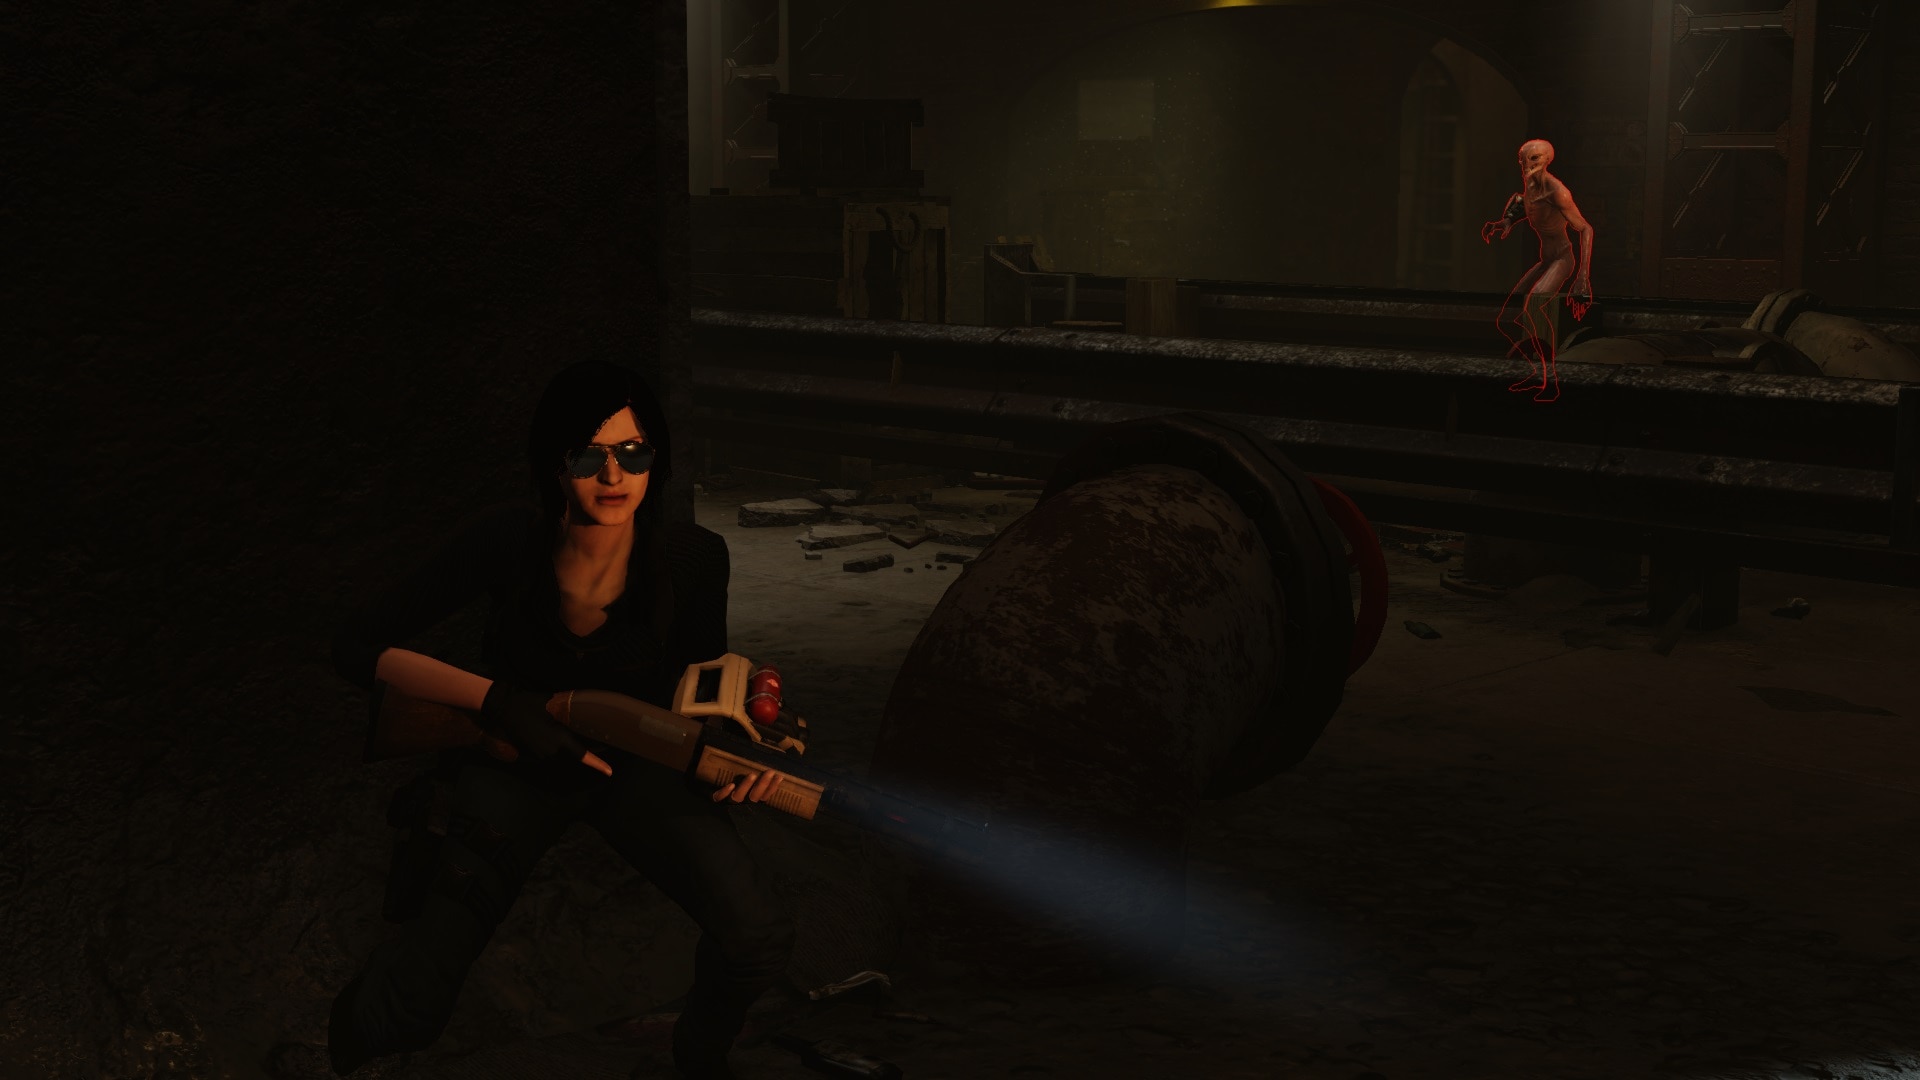 Steam Workshop::[WOTC] Resident Evil 2: Remake Claire Redfield (Military)